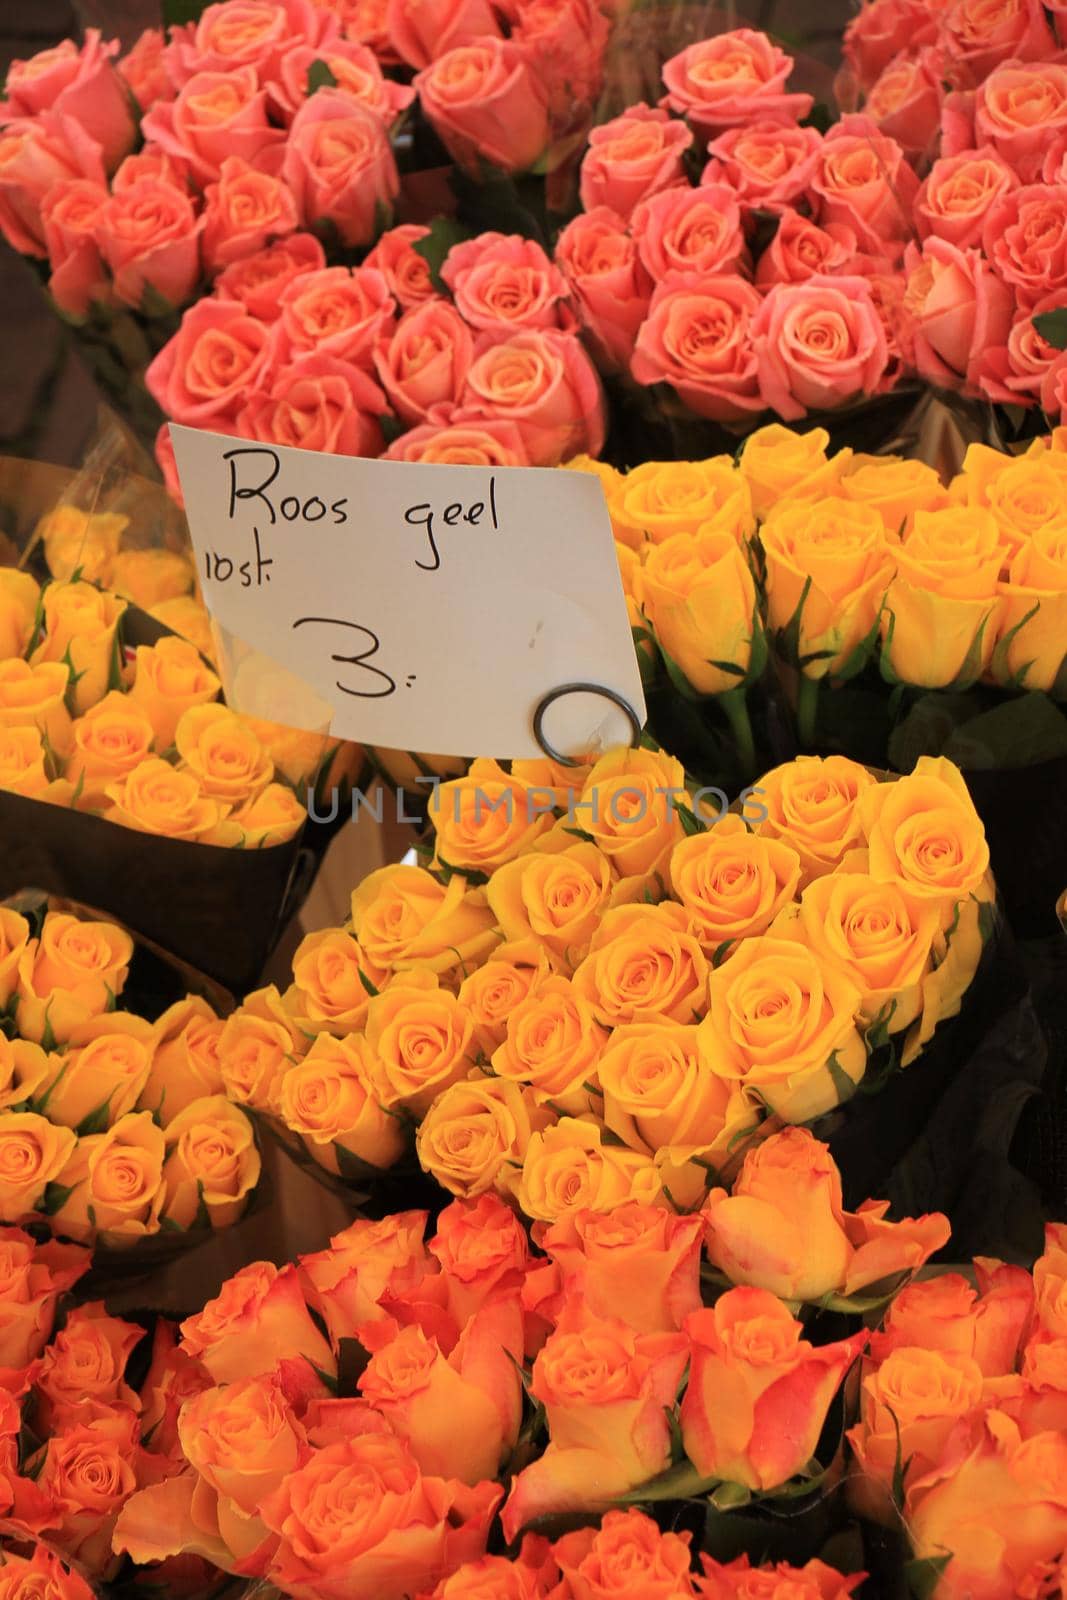 Roses in various colors by studioportosabbia